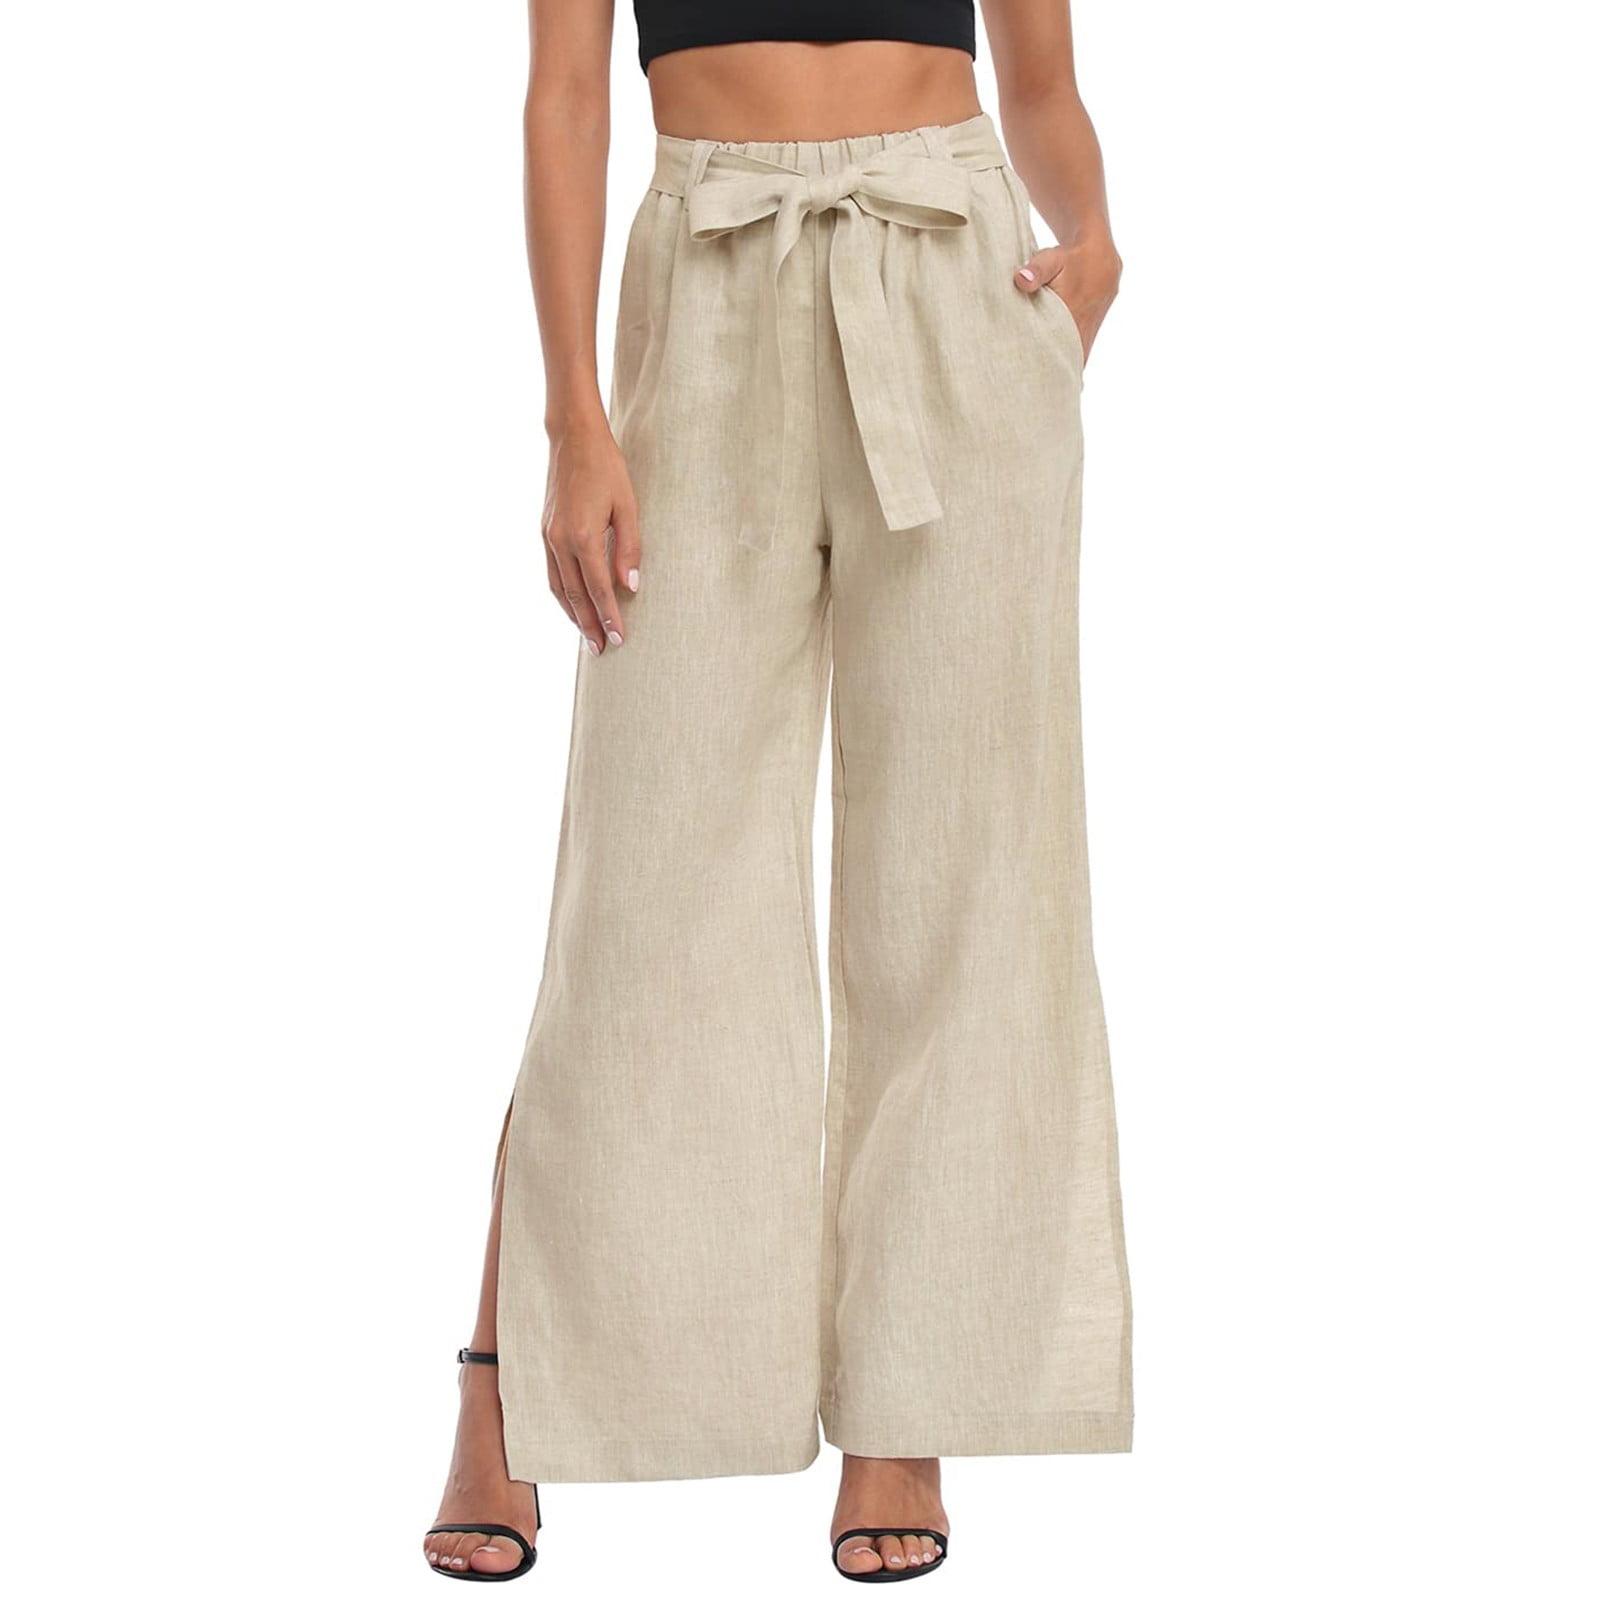 HSMQHJWE Petite Palazzo Pants For Women Petite Length Womens Pants With Pockets  Casual Women'S Linen Wide Leg Palazzo Pants Paperbag Flowy Boho Pant With Pockets  Ladies Summer Pants 